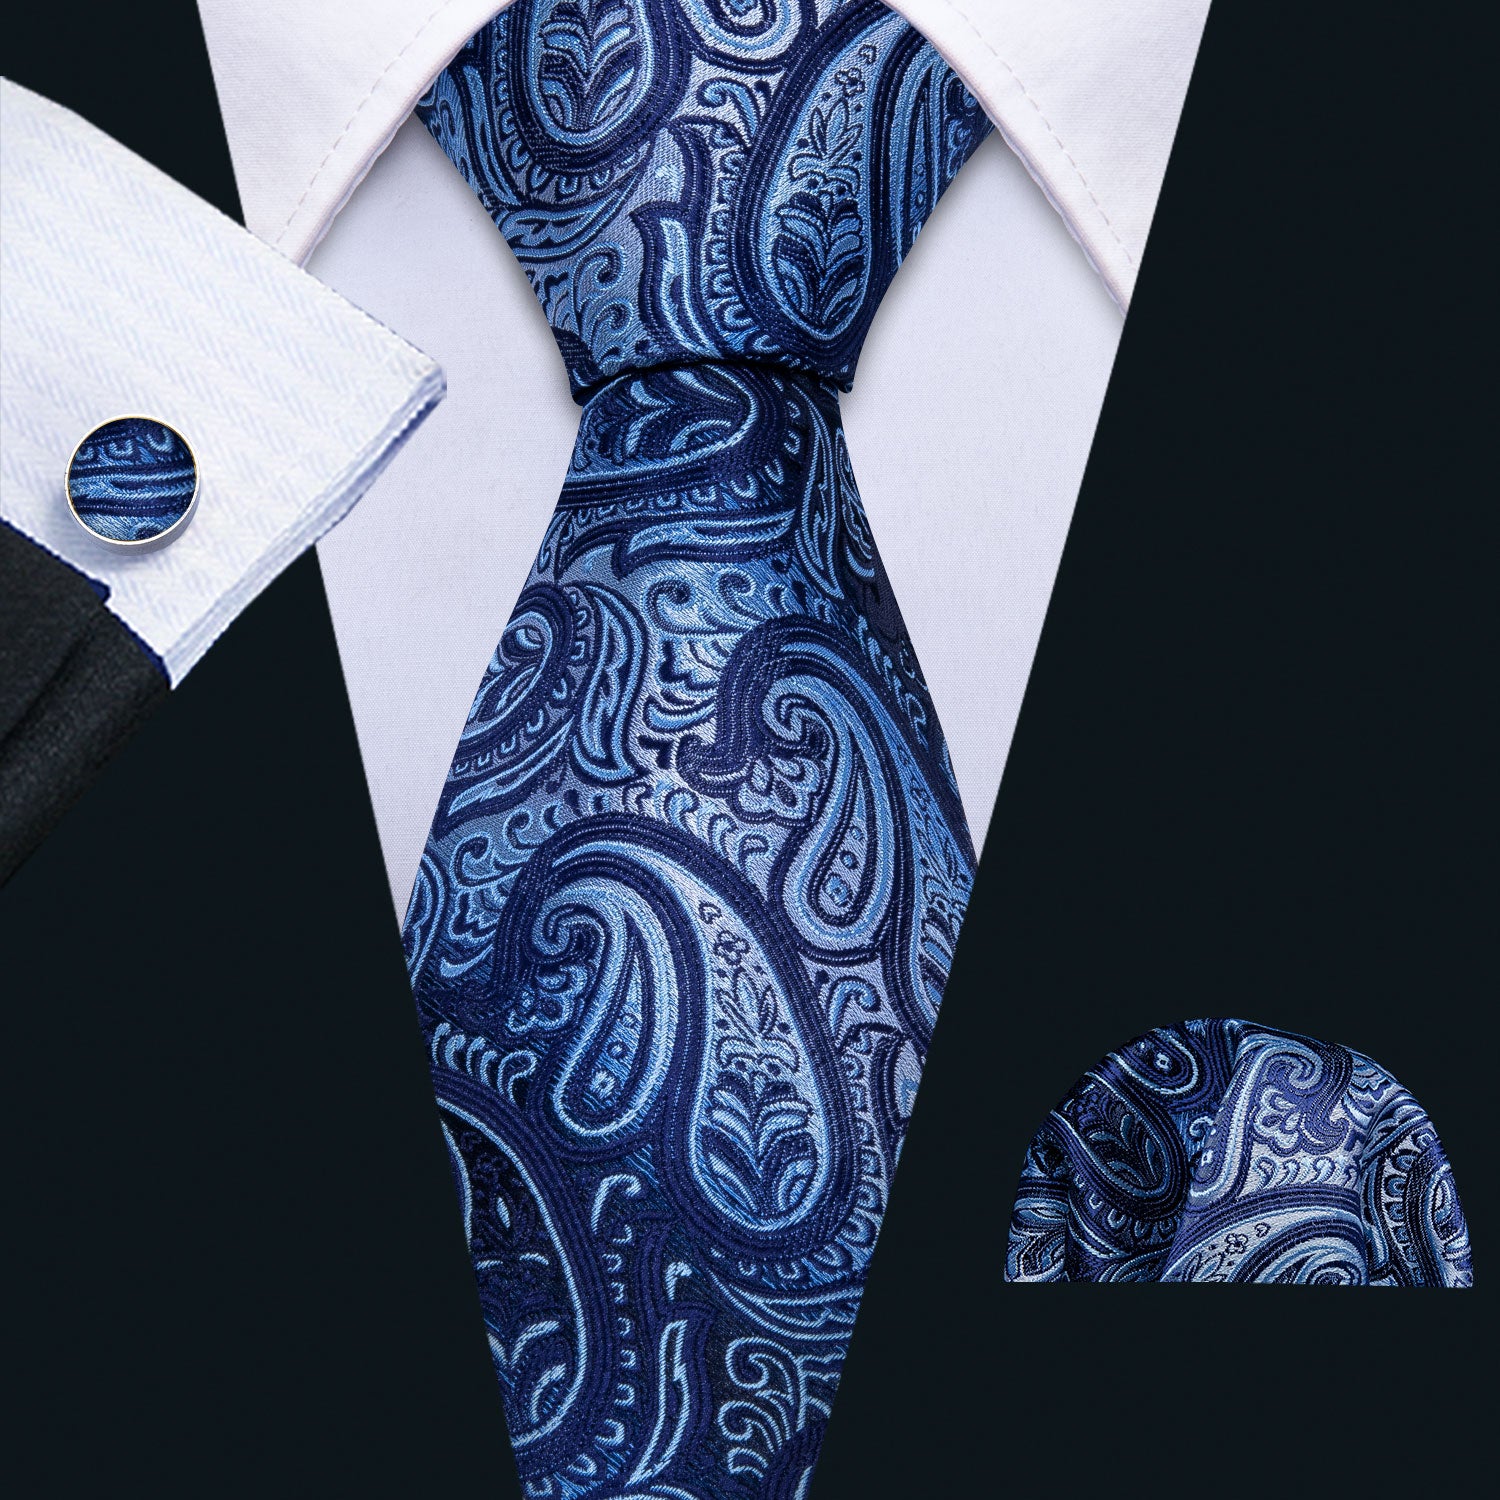 Blue Tie Awesome Paisley Men's Tie